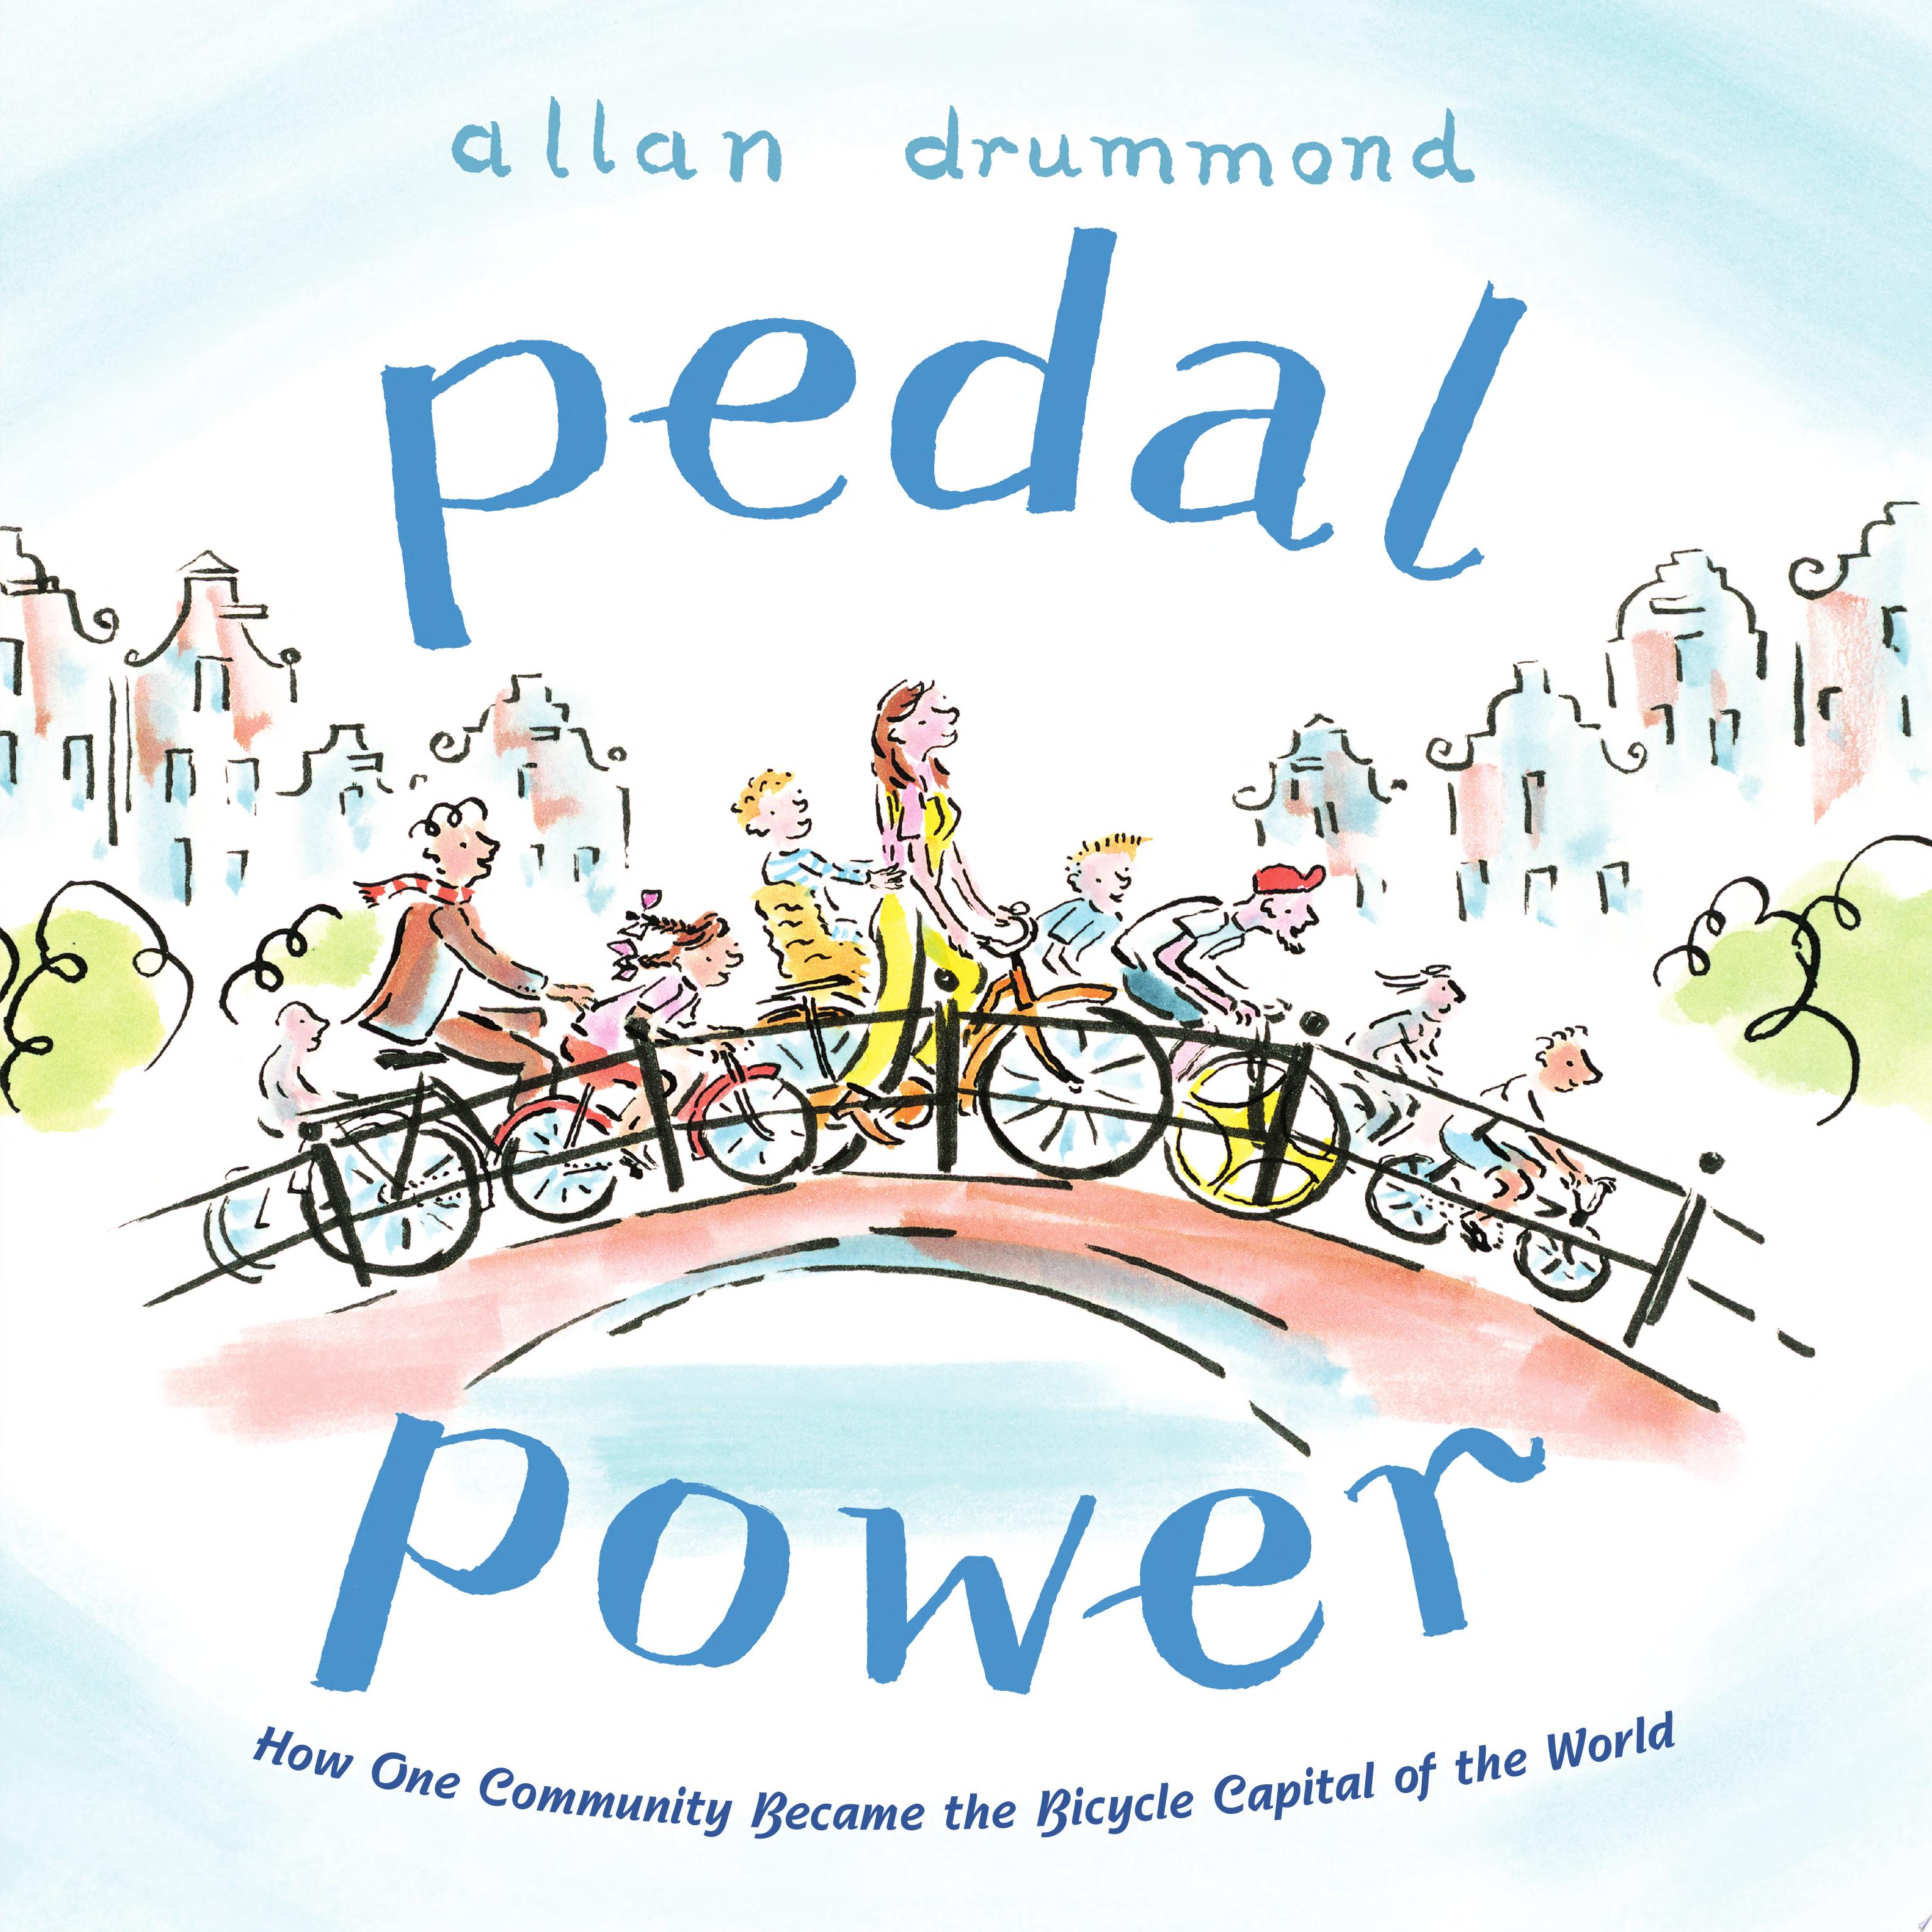 Image for "Pedal Power"